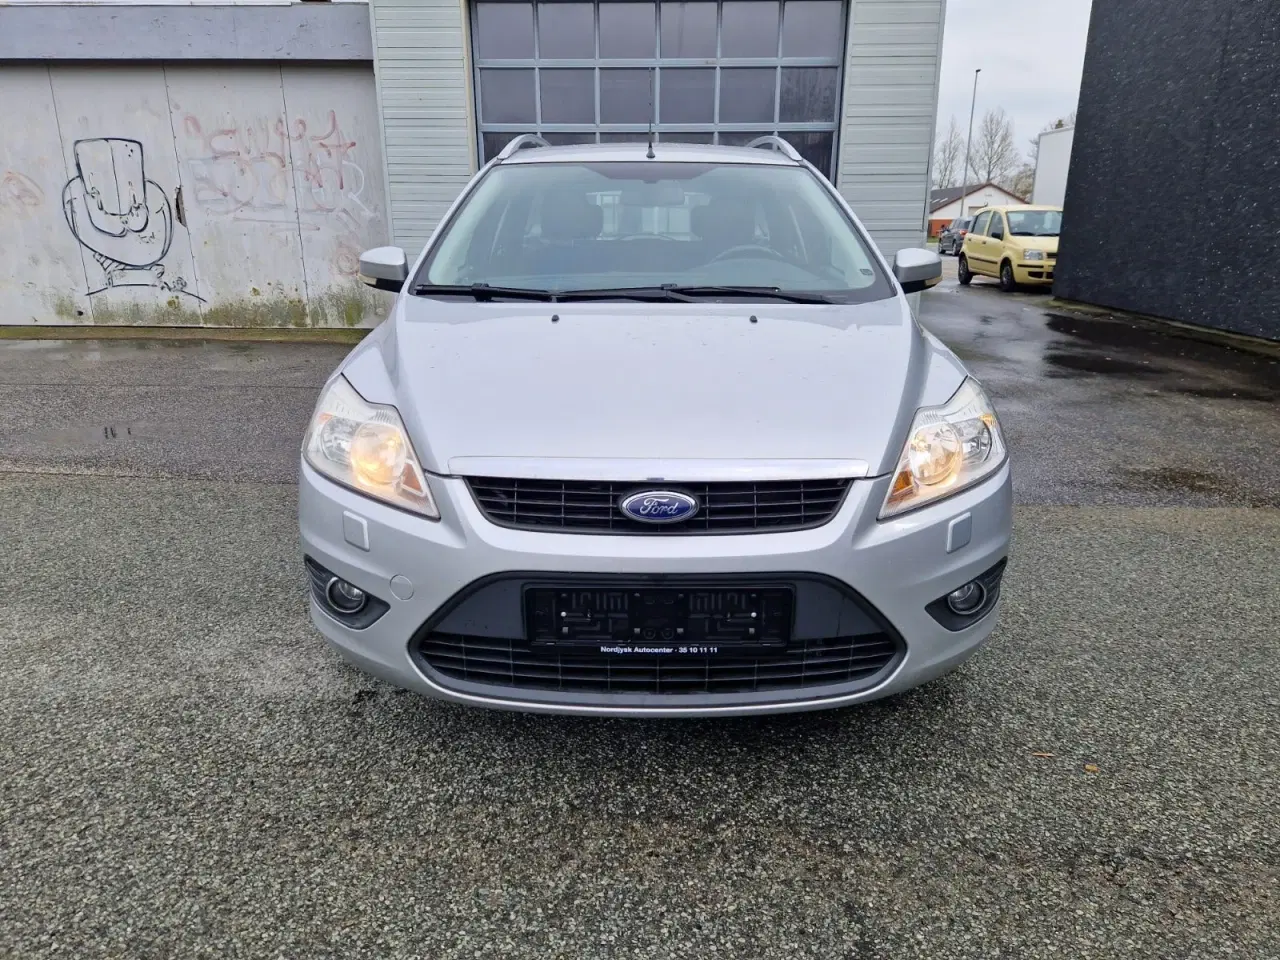 Billede 3 - Ford Focus 1,6 TDCi 109 Trend Collection stc.